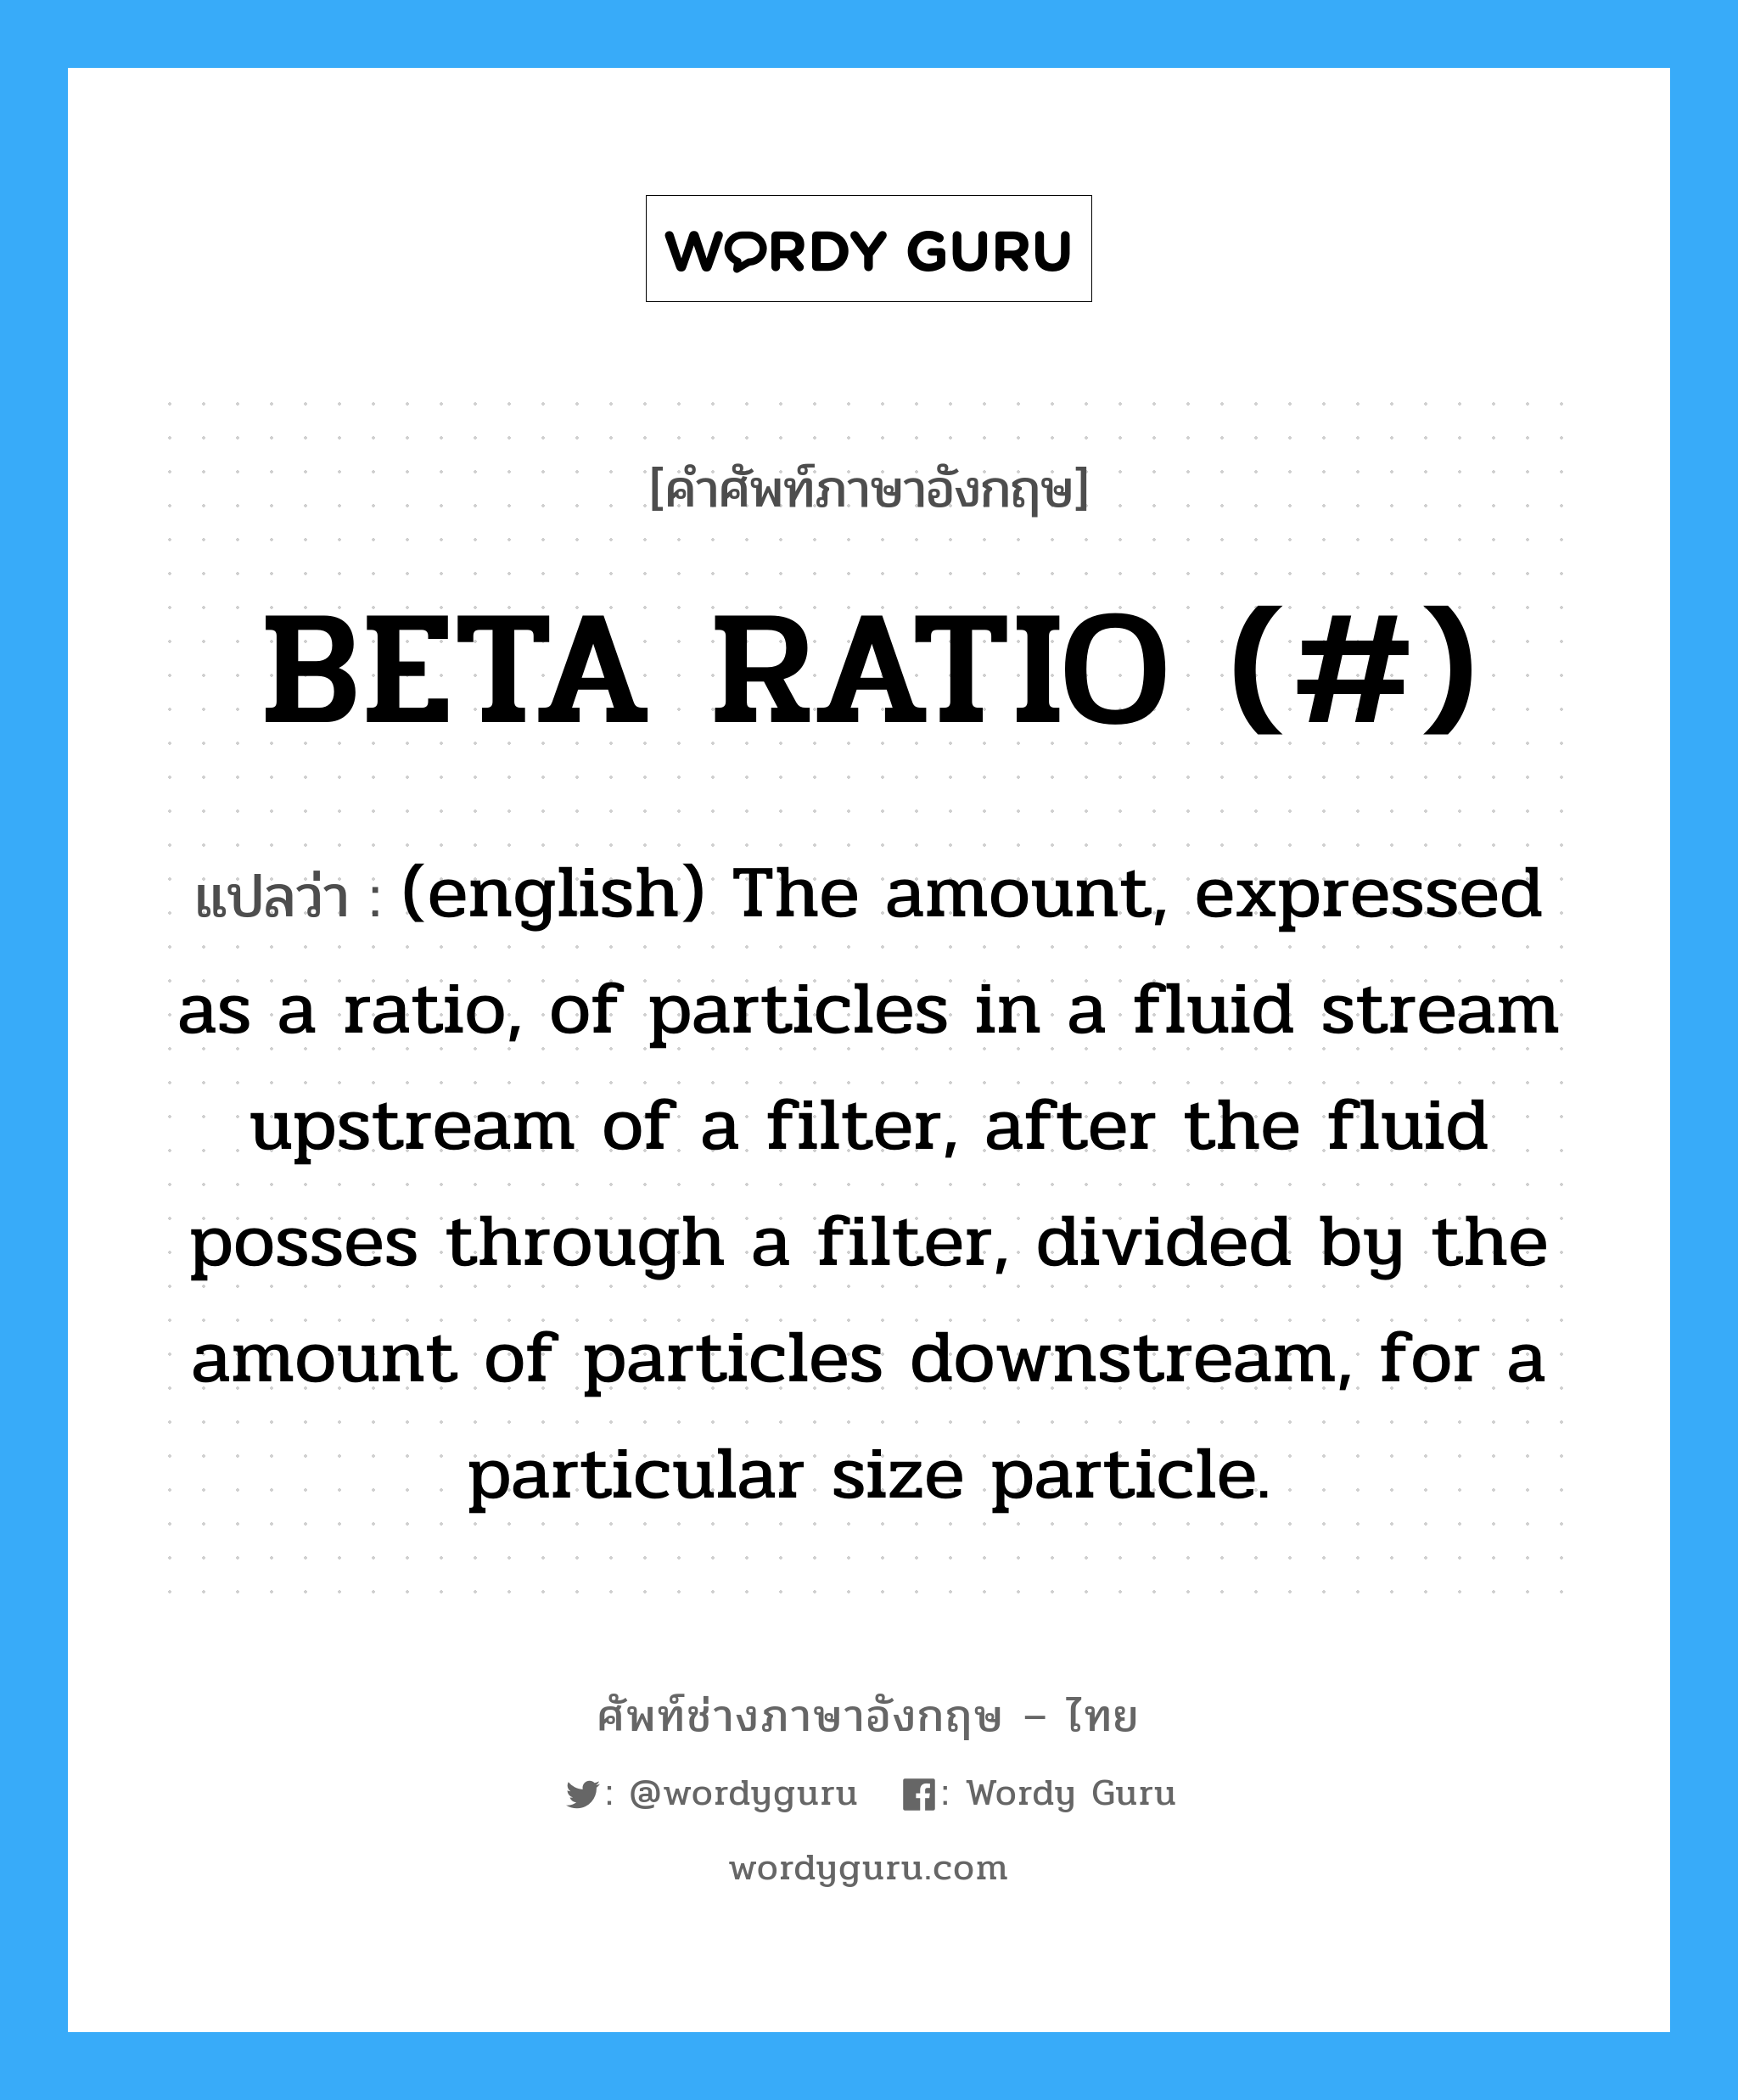 BETA RATIO (#) แปลว่า?, คำศัพท์ช่างภาษาอังกฤษ - ไทย BETA RATIO (#) คำศัพท์ภาษาอังกฤษ BETA RATIO (#) แปลว่า (english) The amount, expressed as a ratio, of particles in a fluid stream upstream of a filter, after the fluid posses through a filter, divided by the amount of particles downstream, for a particular size particle.